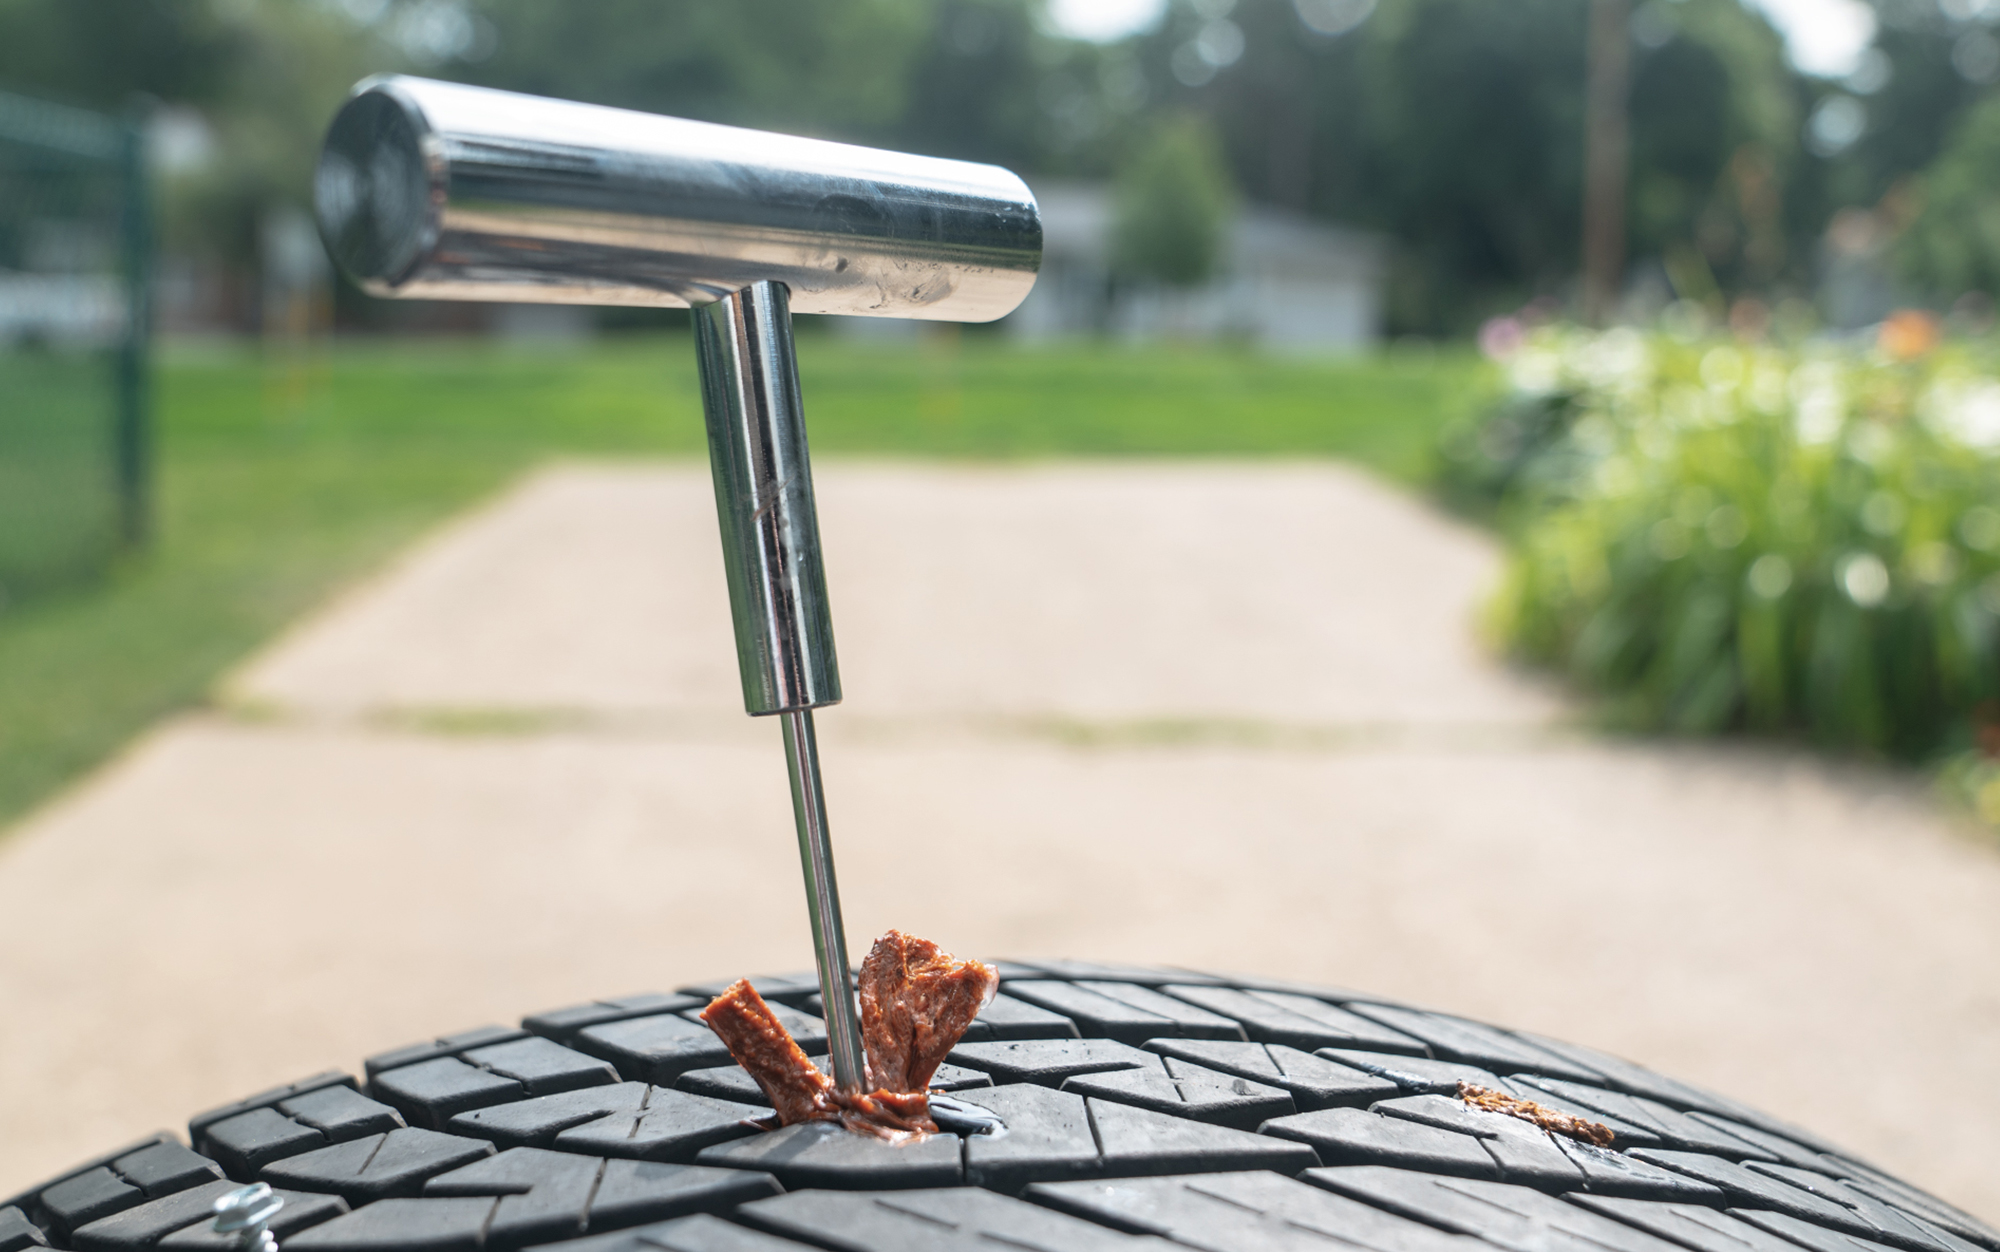 Get on the road faster with a tire repair kit.